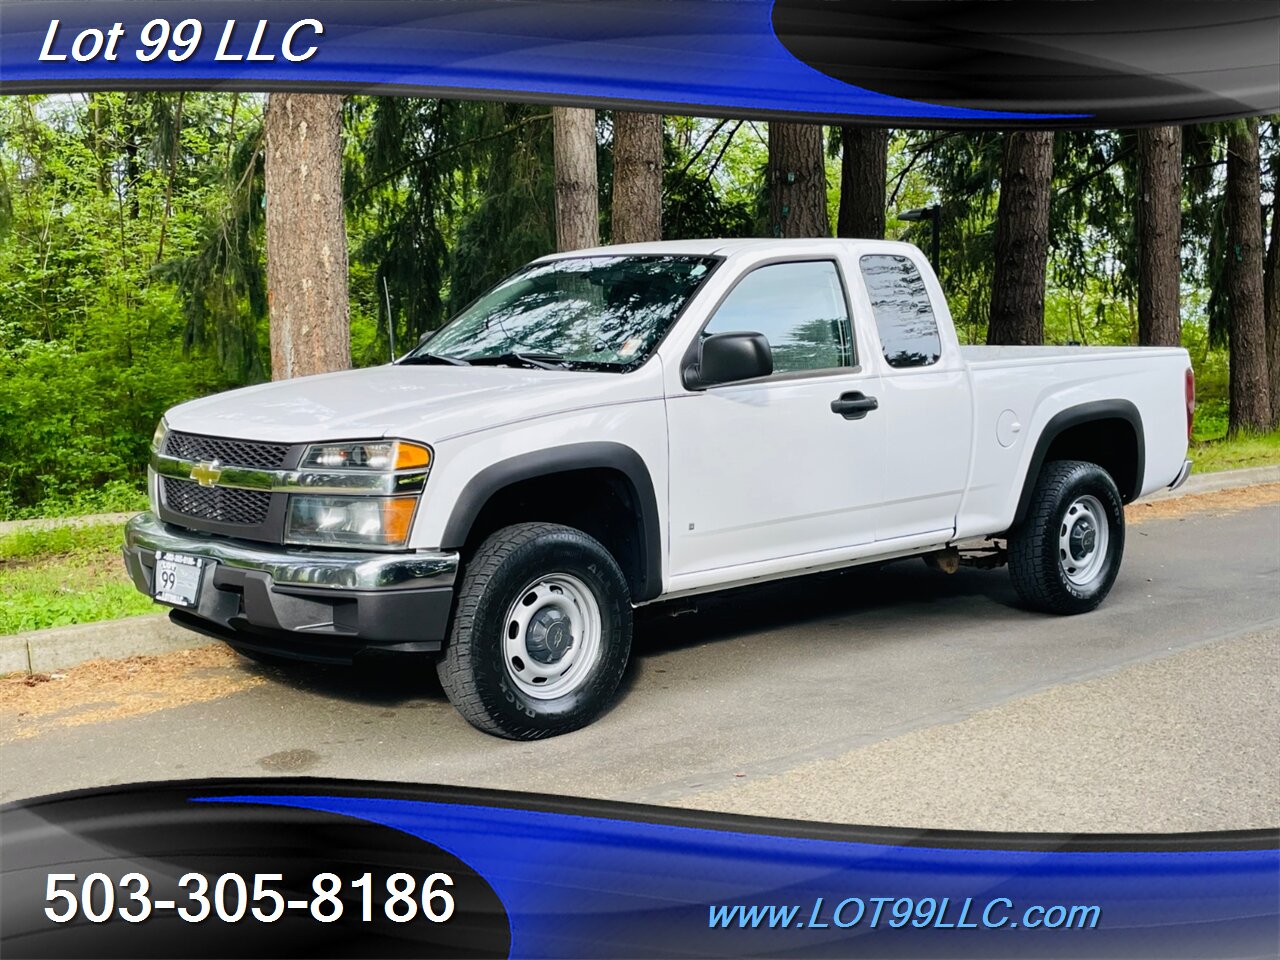 2007 Chevrolet Colorado Extended Cab LT 4x4 6' Bed Vortec 3.7L I5 242hp   - Photo 2 - Milwaukie, OR 97267